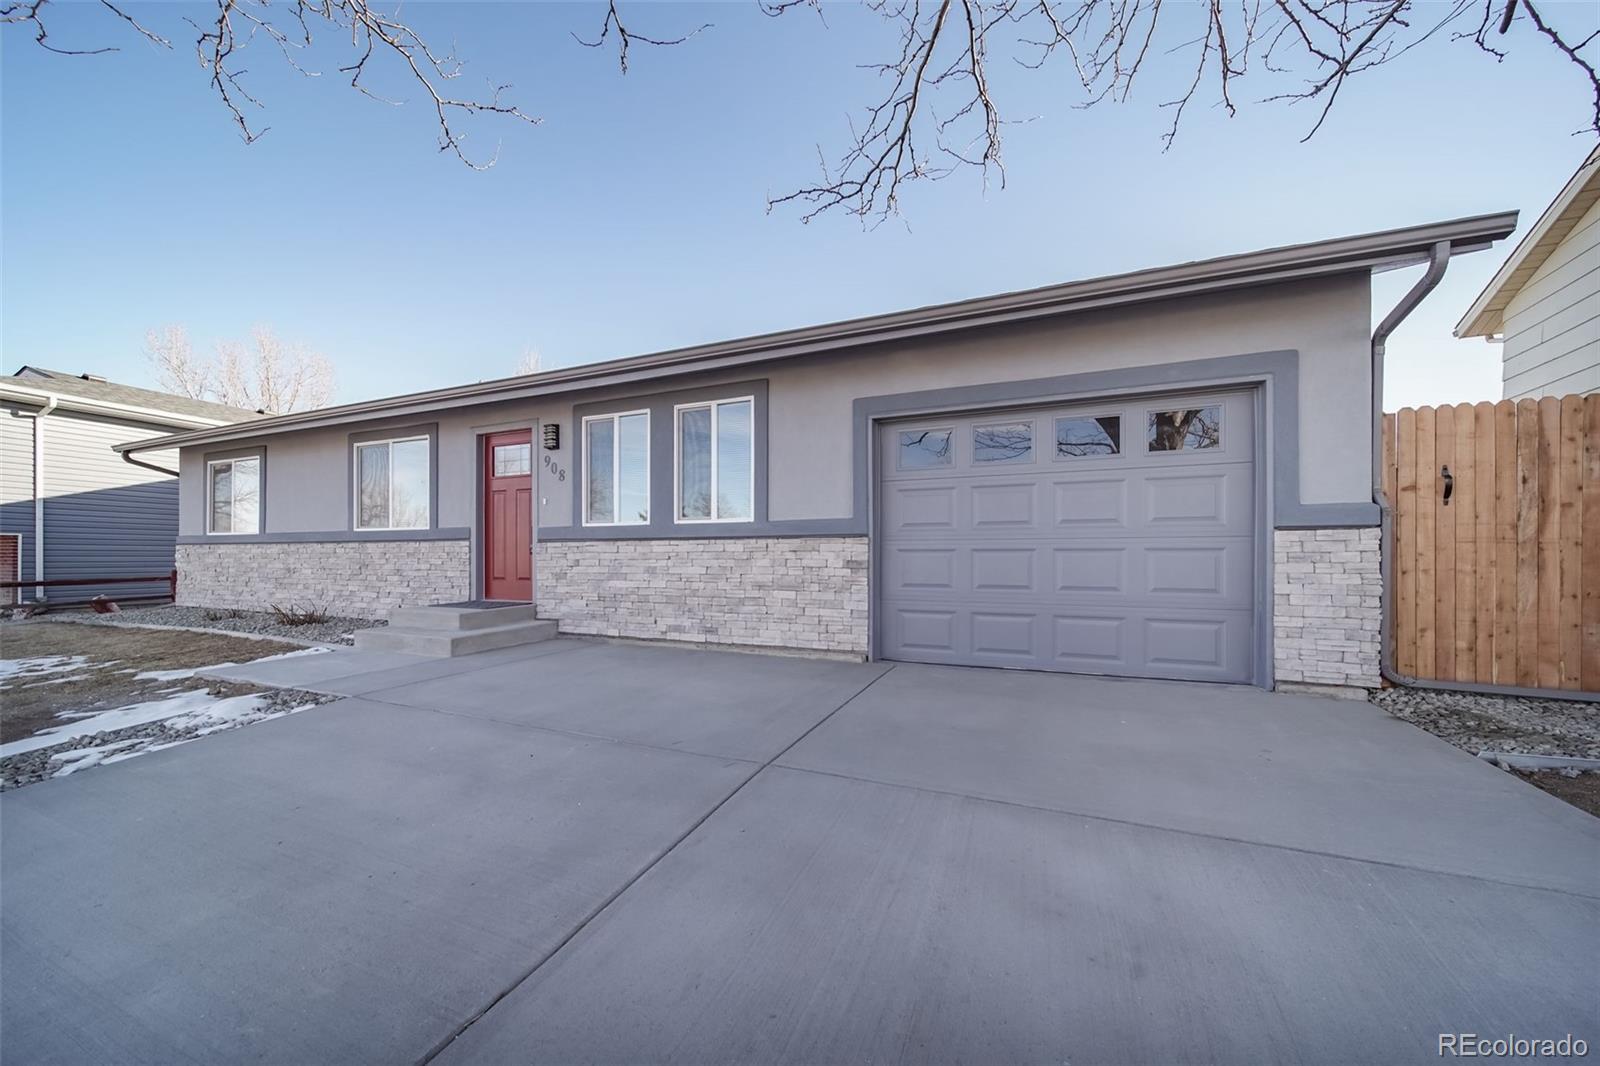 Report Image for 908  Birch Court,Fort Lupton, Colorado